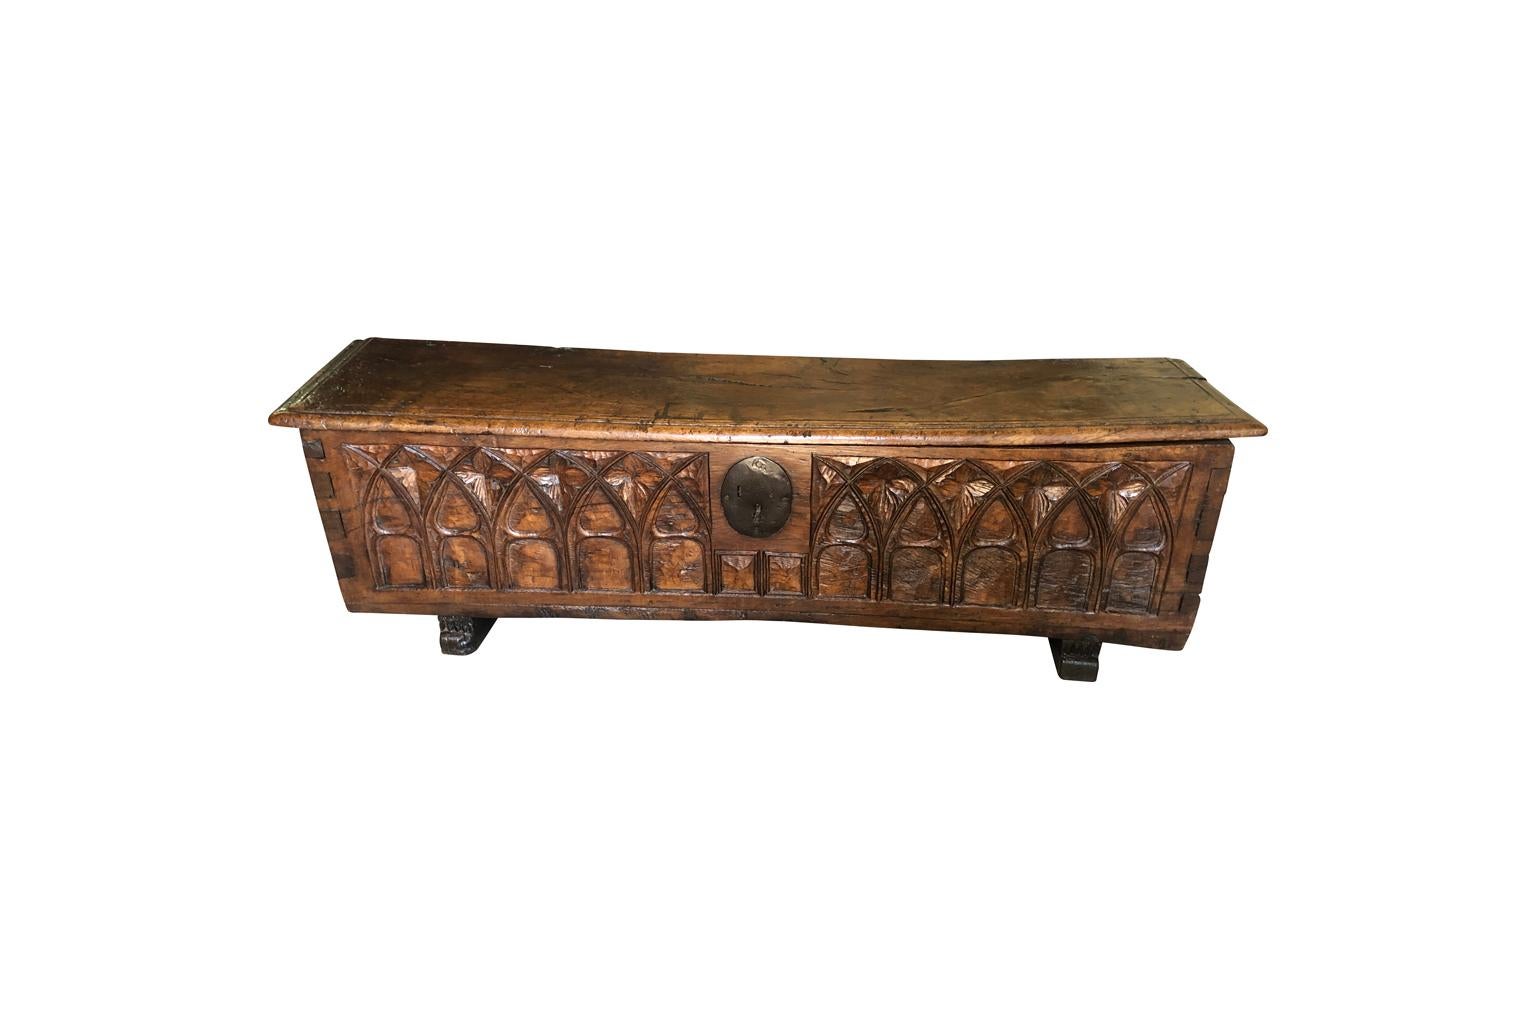 A very handsome French 18th century Gothic style coffer, trunk beautifully constructed from solid boards of richly stained oak. Wonderful carving detail. Super patina. Terrific at the foot of a bed, under a picture window, or as a narrow coffee